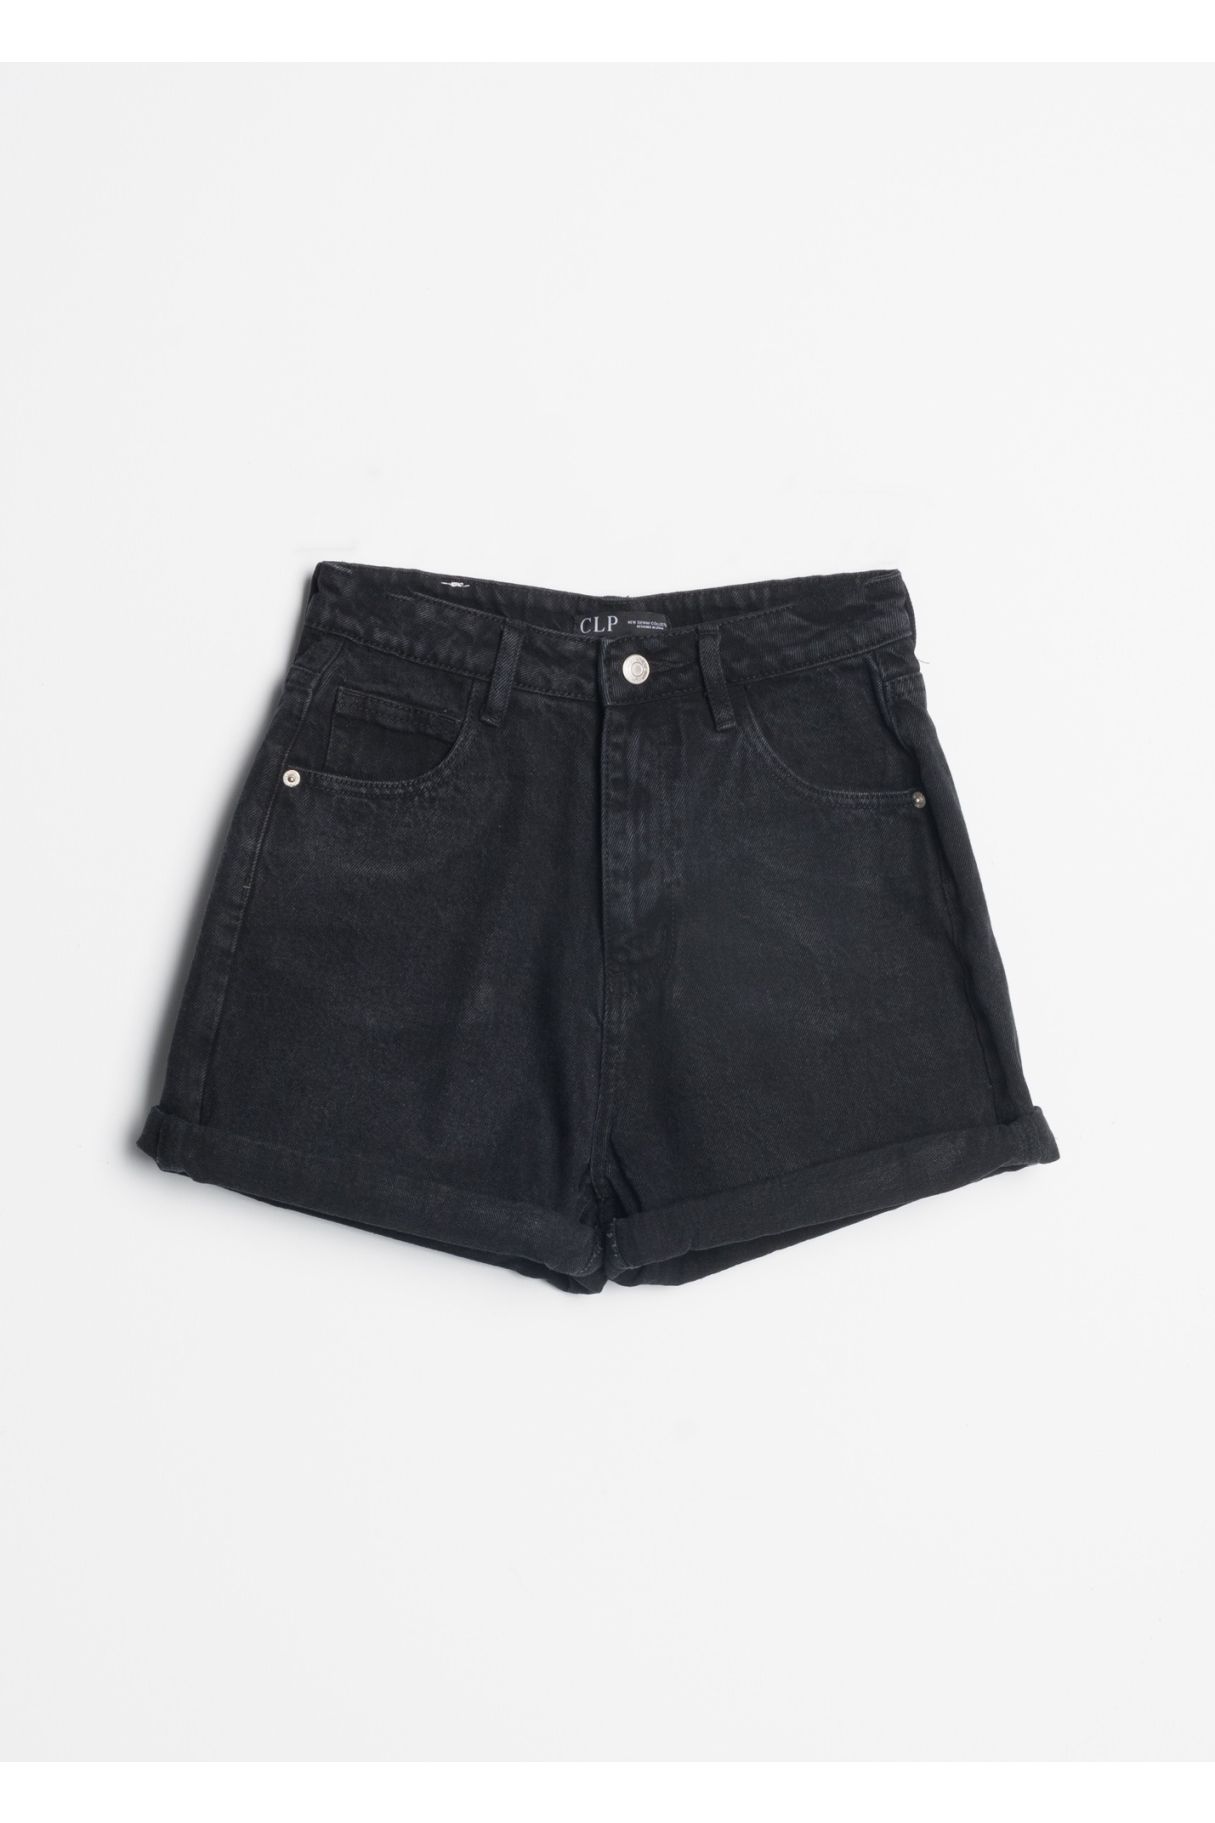 MOM FIT JEANS SHORTS